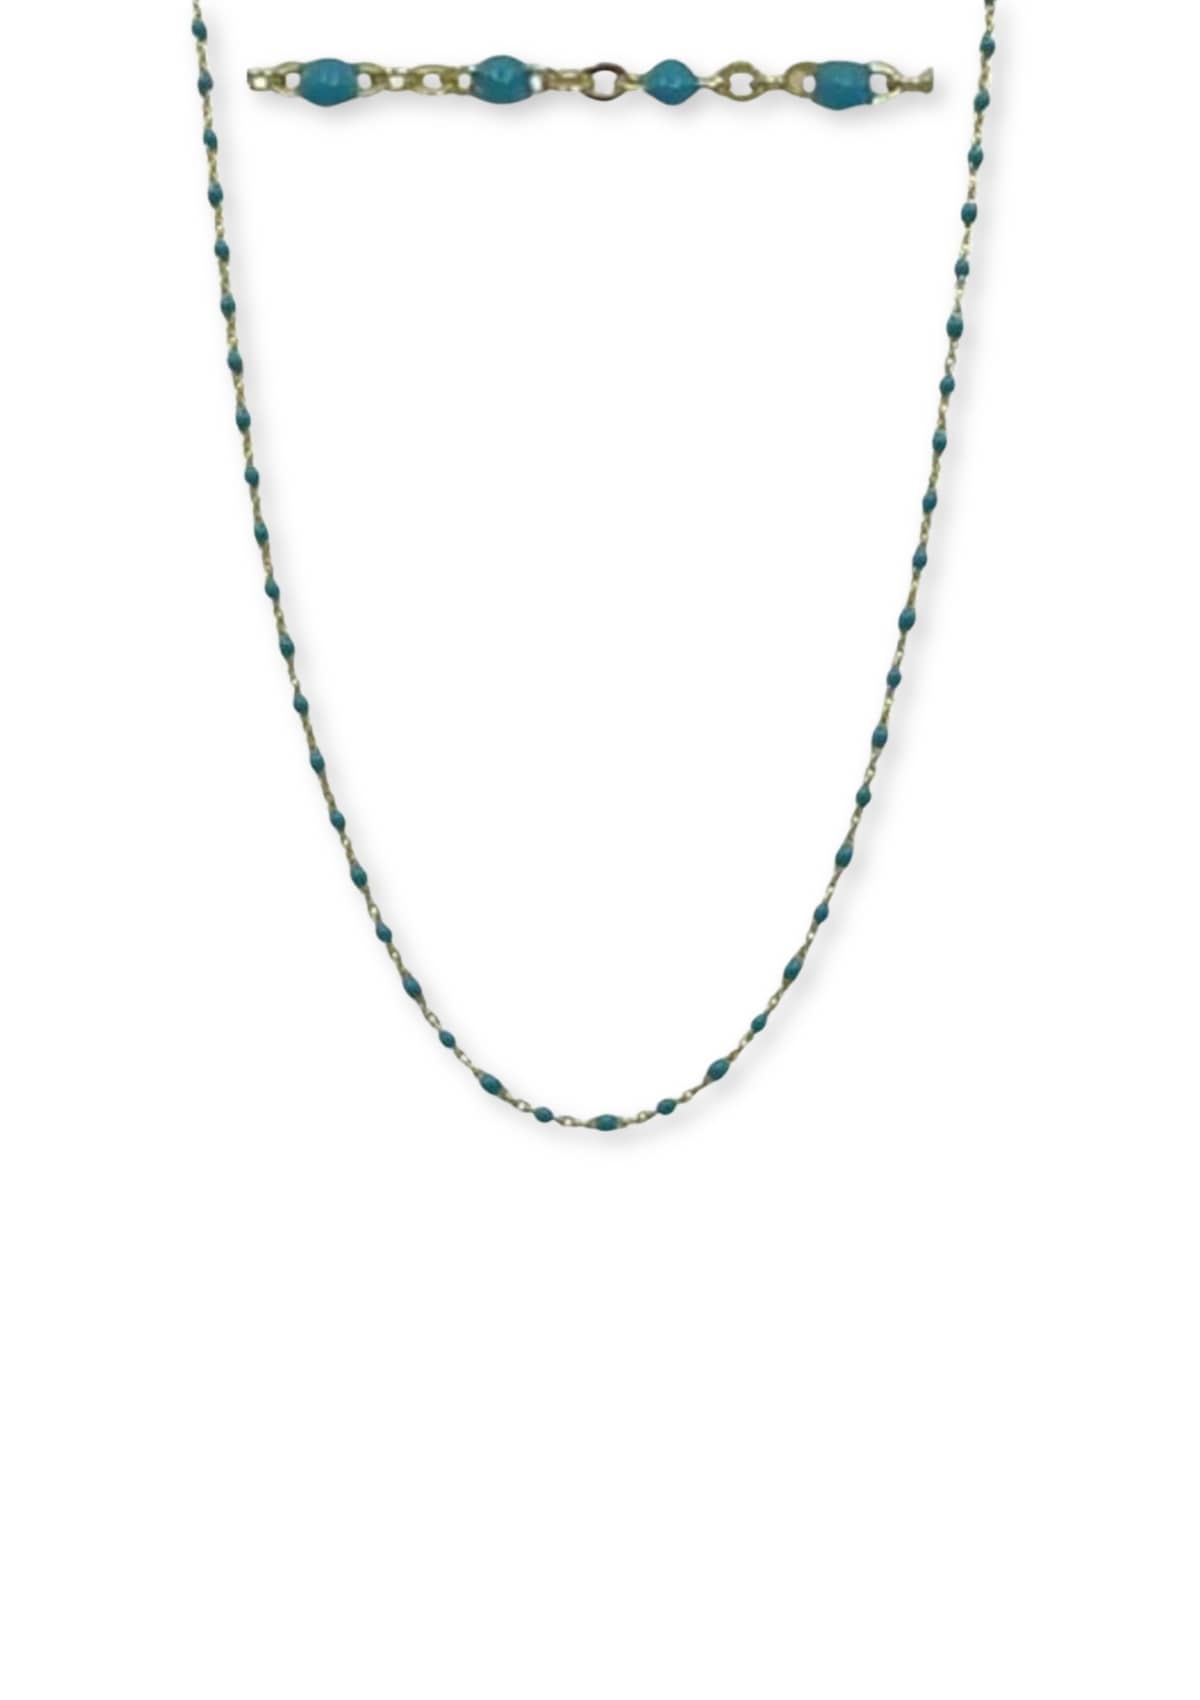 Turquoise Beaded Gold Necklace